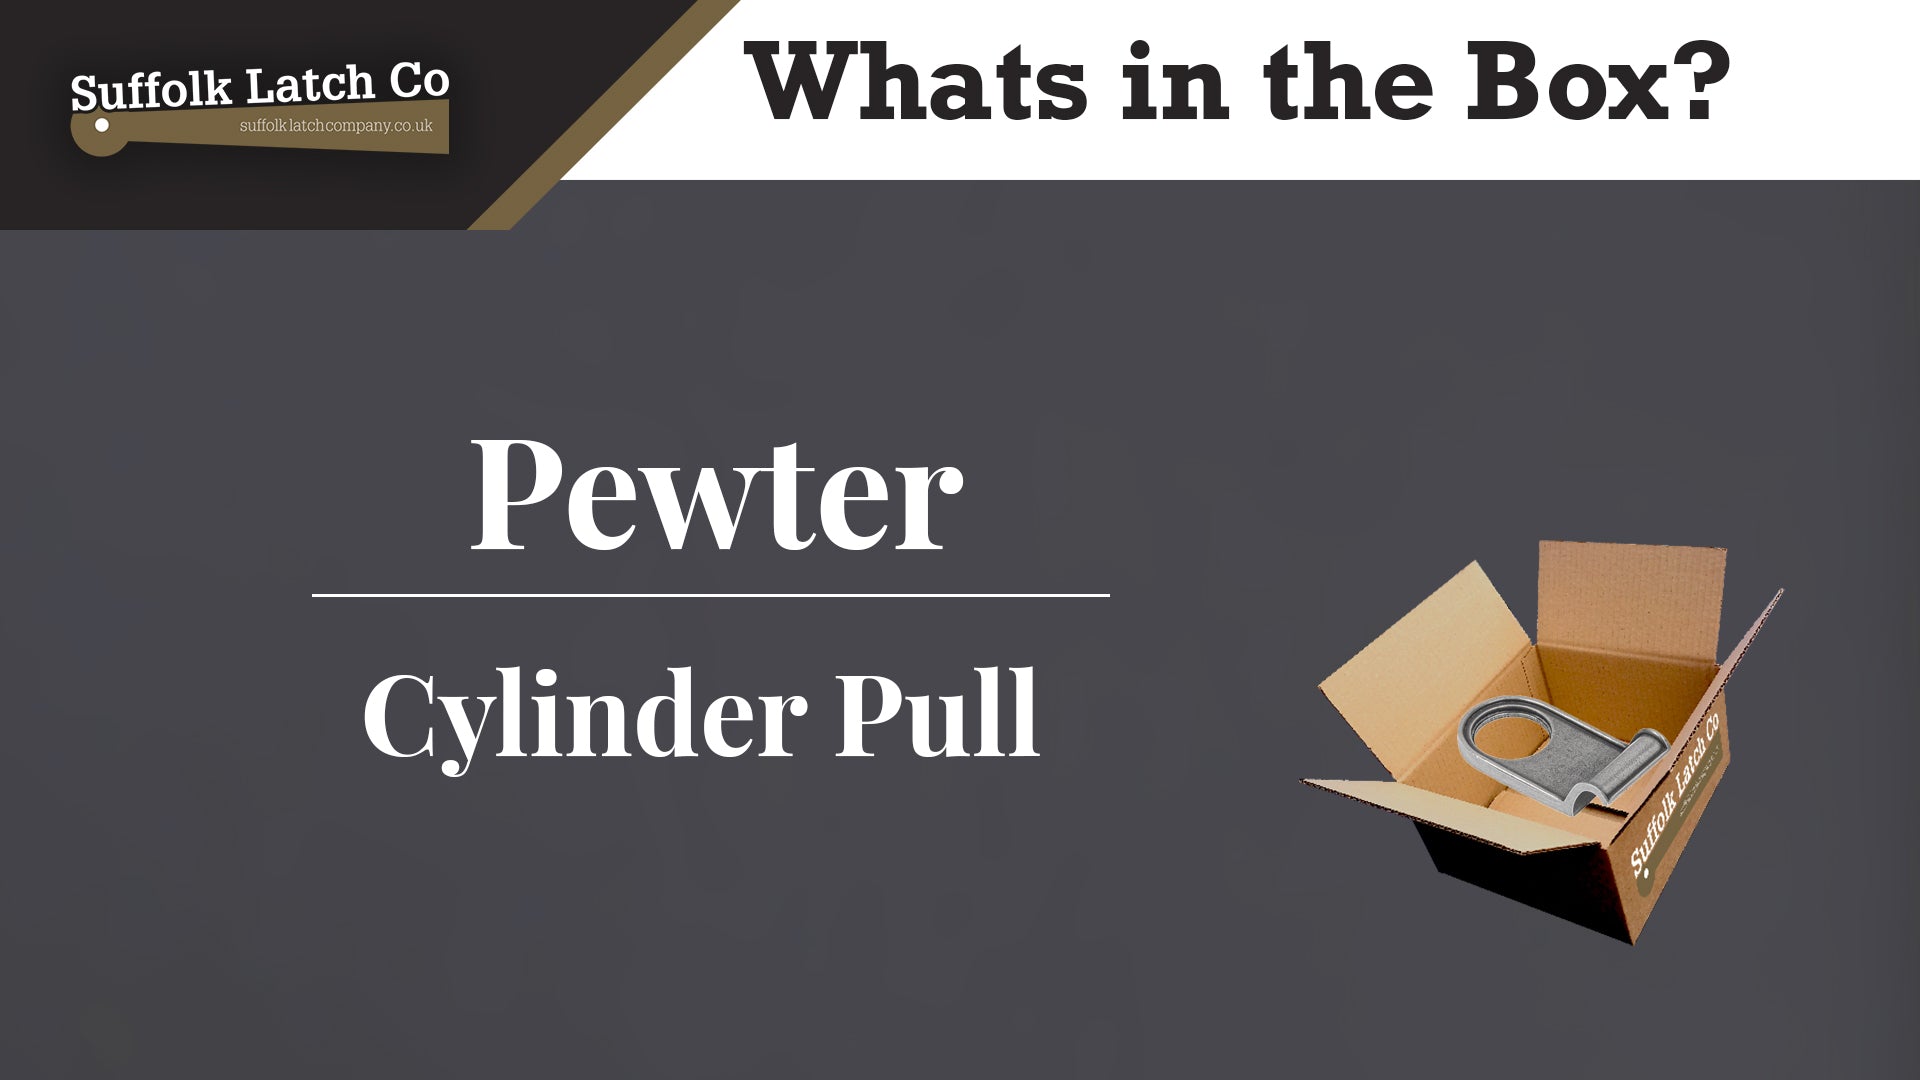 What's in the box? Pewter Cylinder Pull